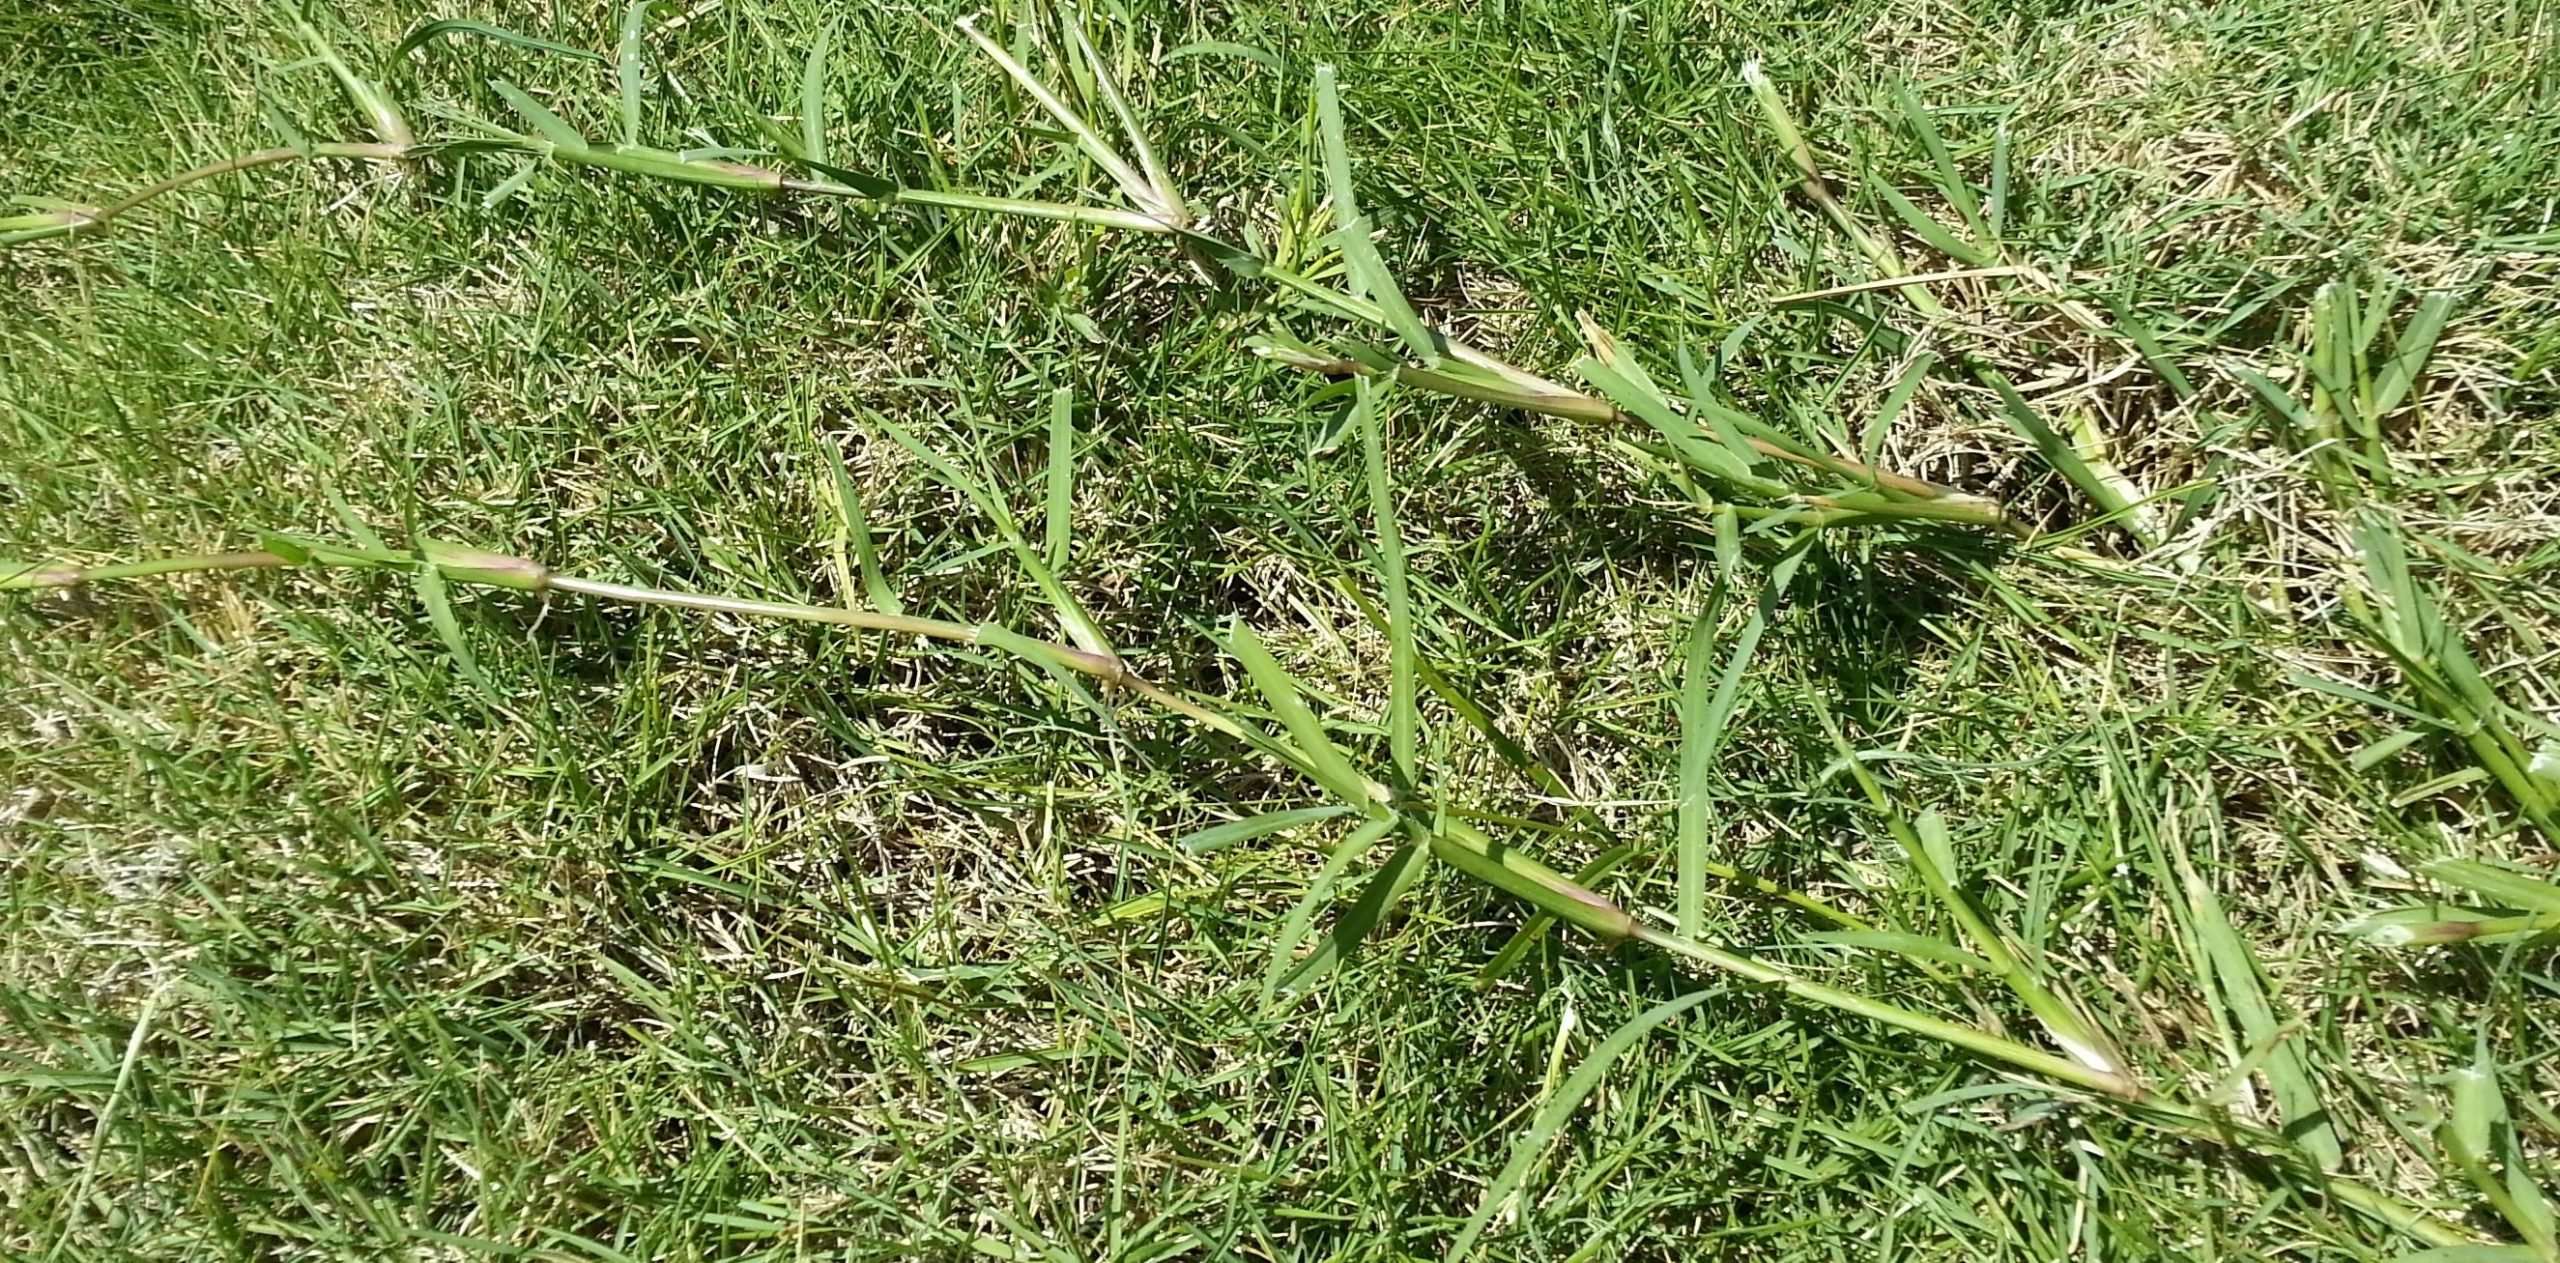 What is this weed? (pic) (flower, 2014, yard, how to ...